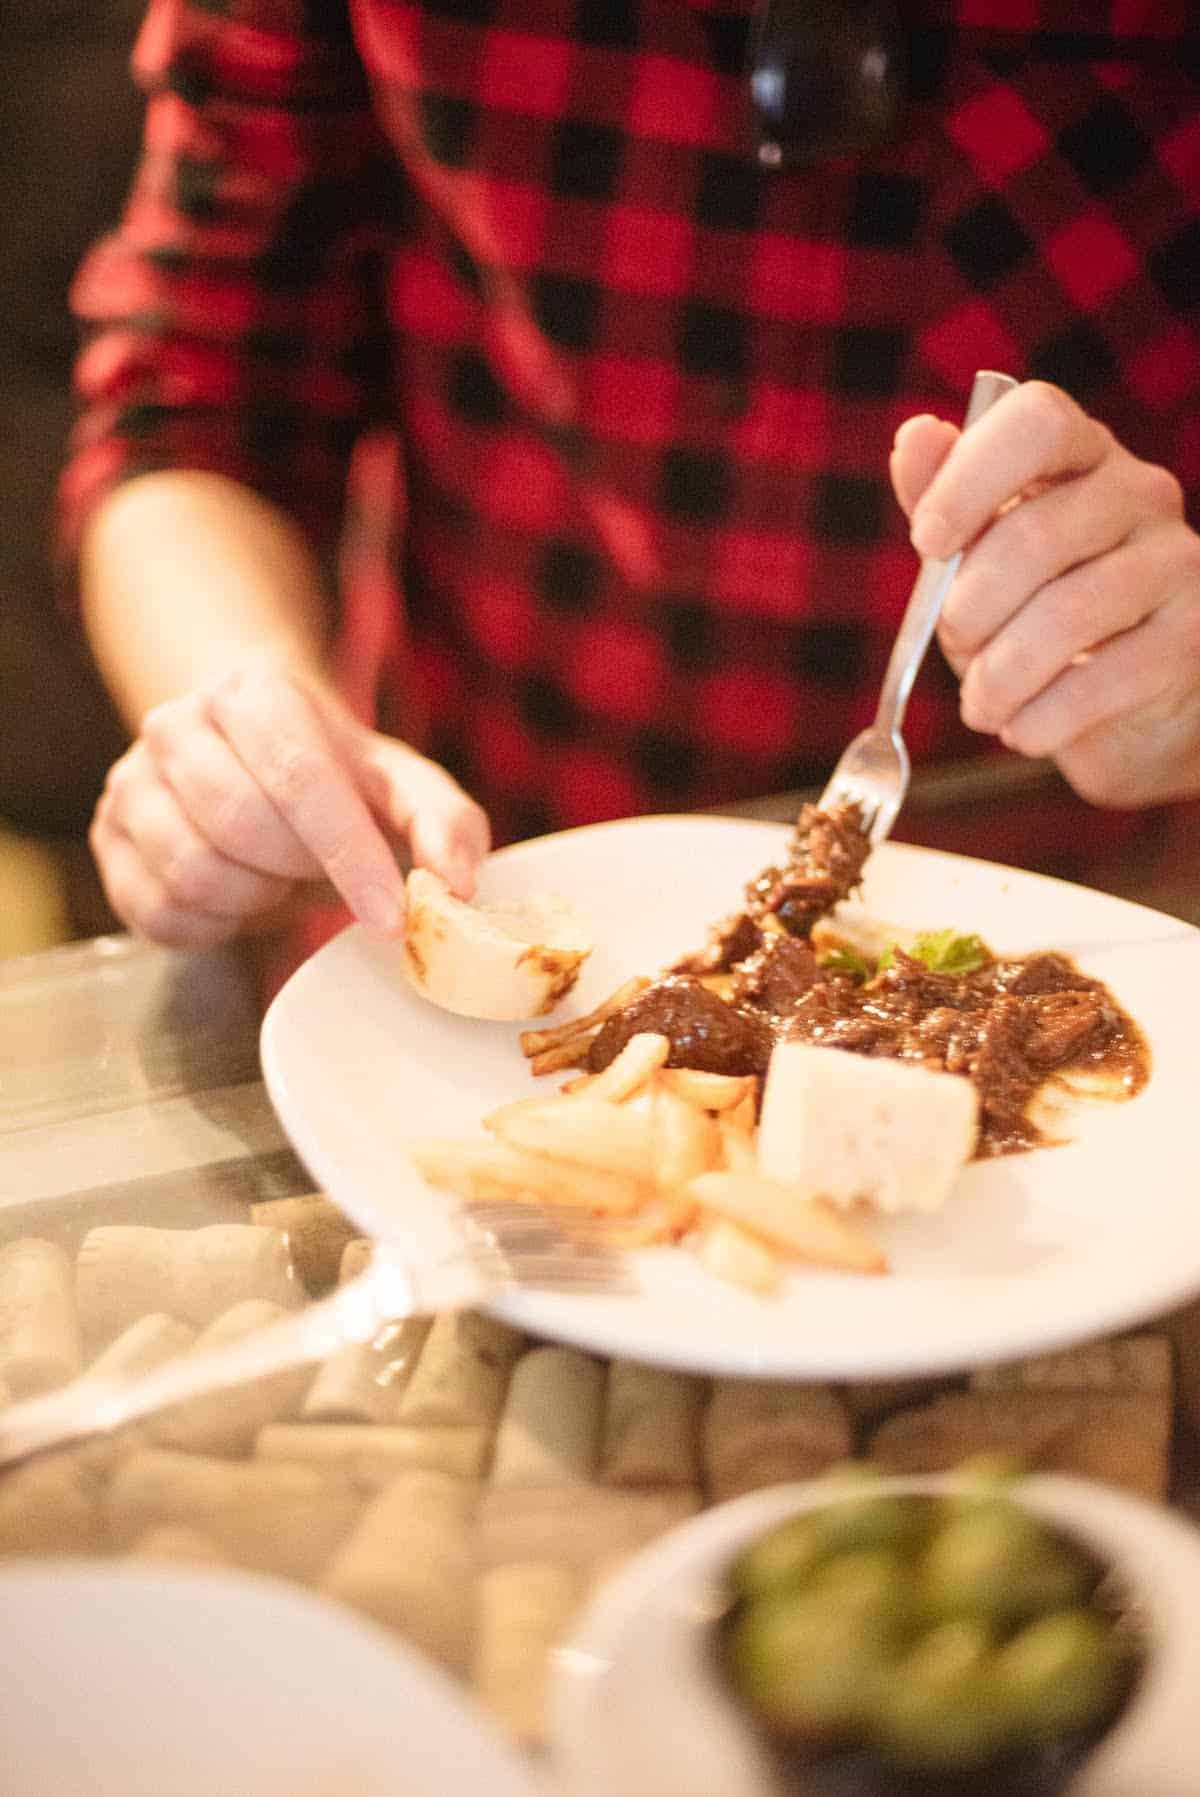 Close up of a person eating a meat dish while holding a small chunk of bread in the other hand